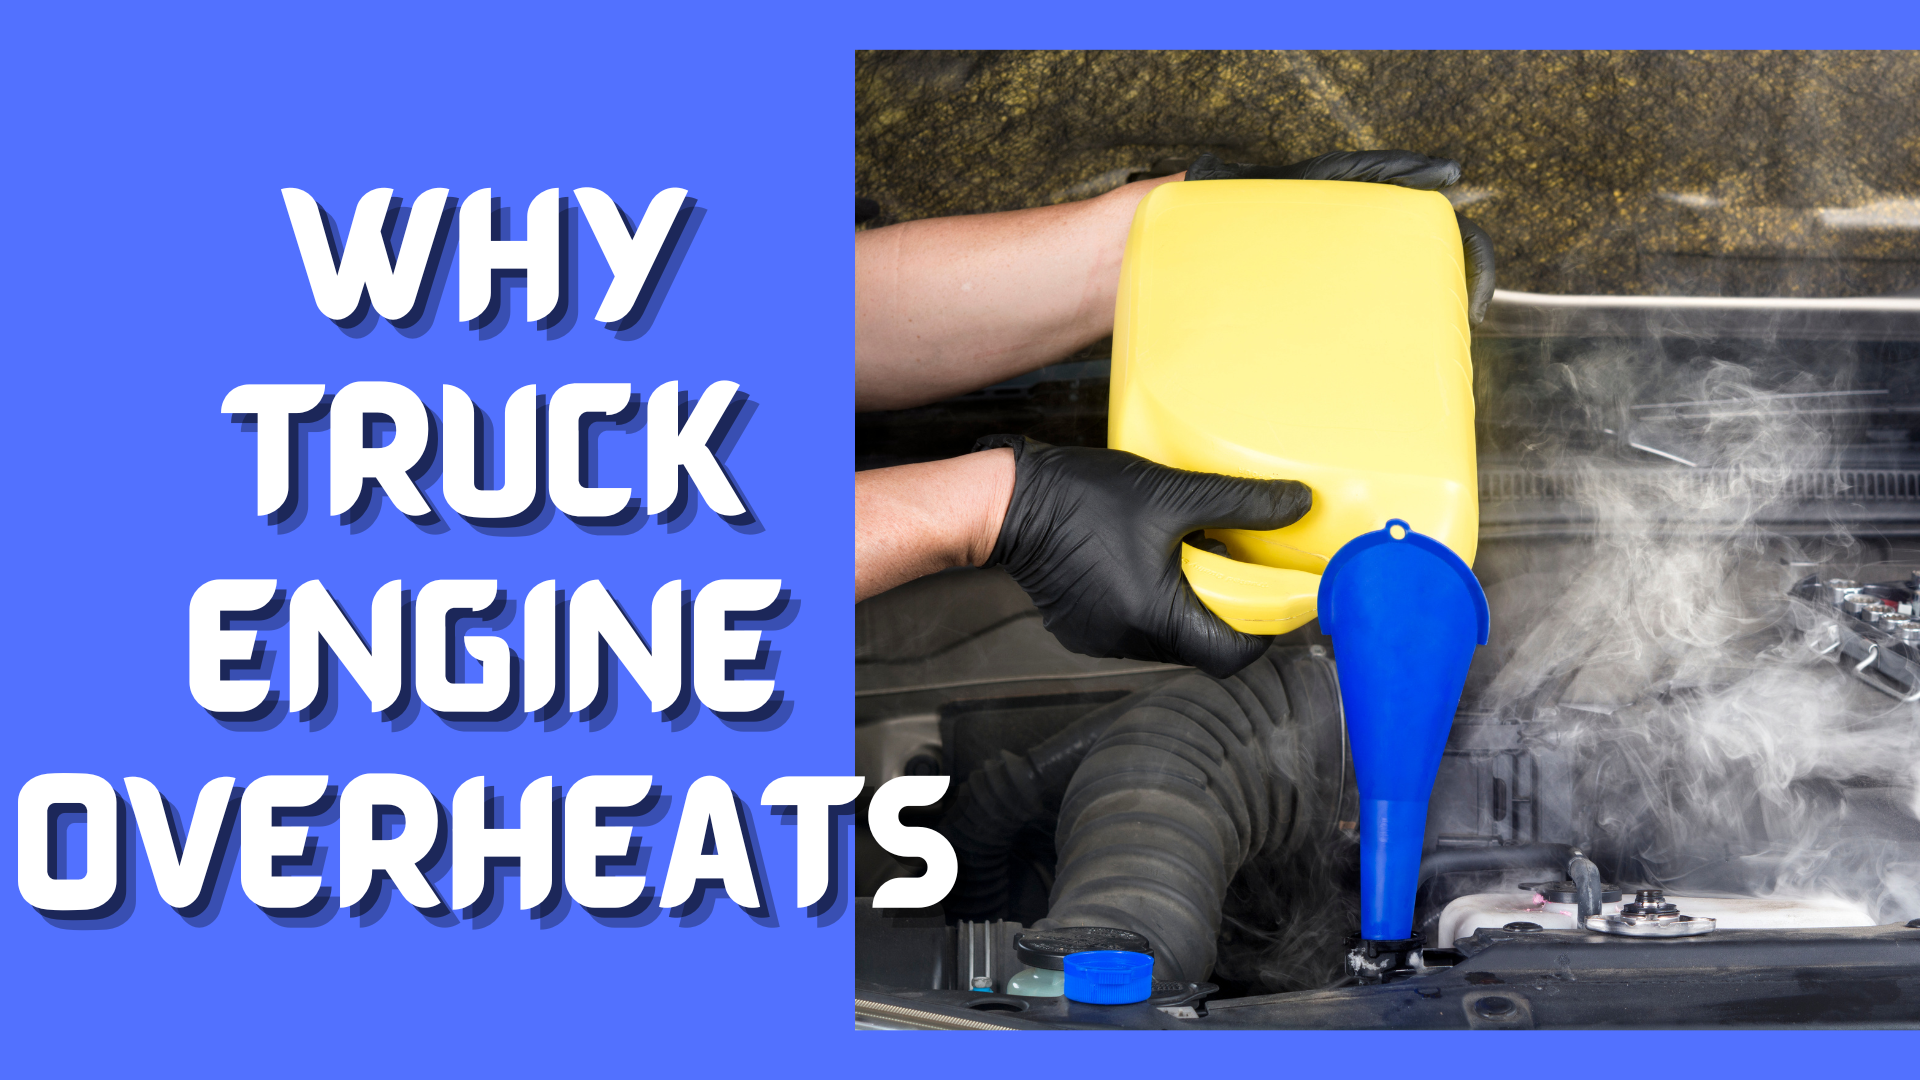 5 Reasons Why Truck Engine Overheats